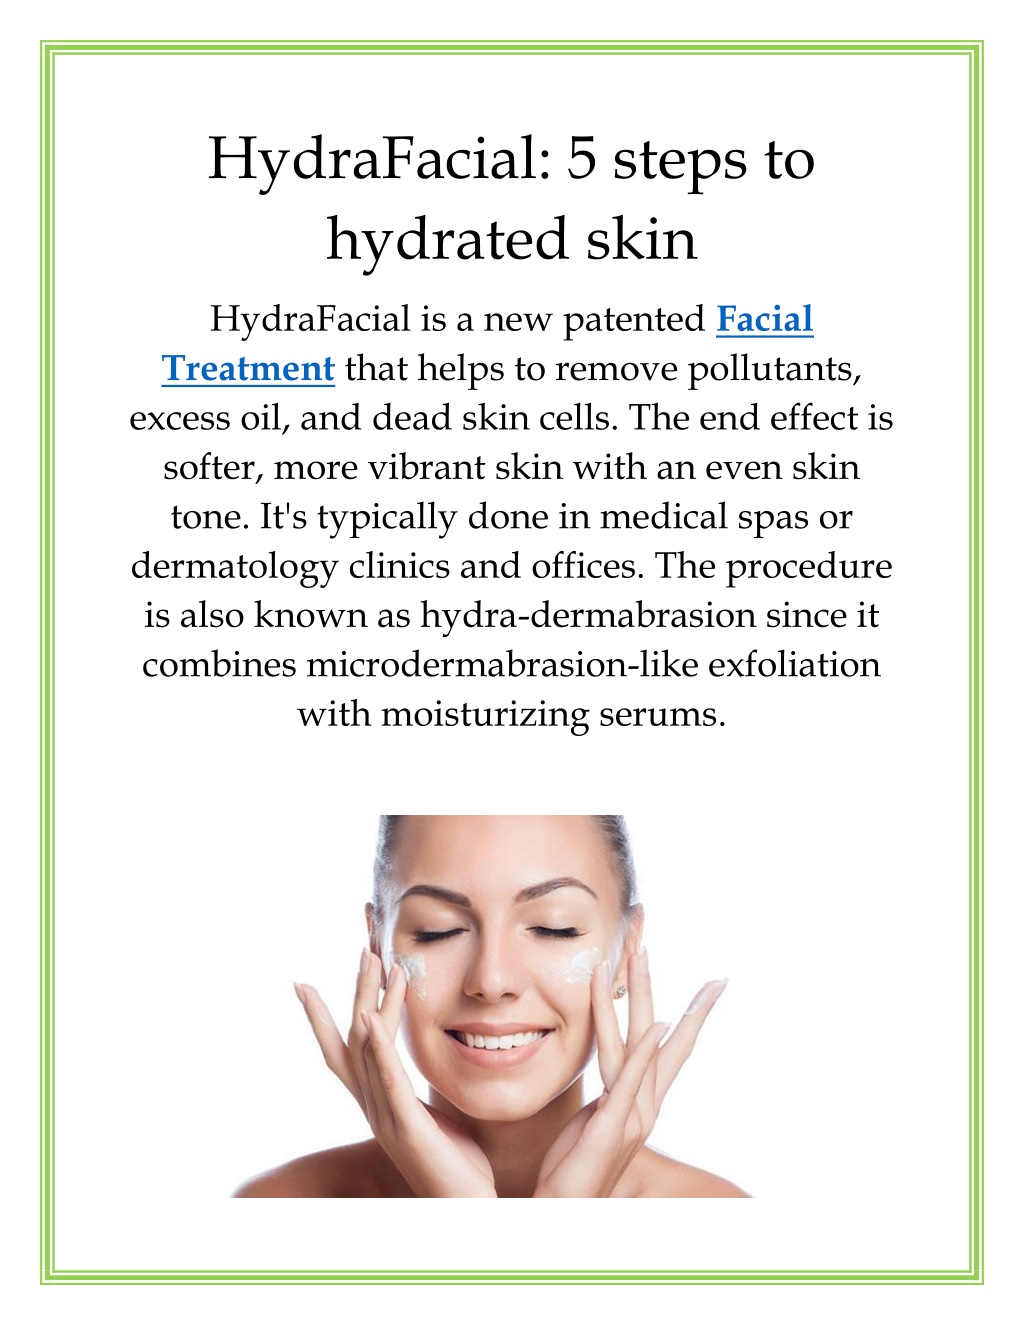 Ppt Hydrafacial 5 Steps To Hydrated Skin Powerpoint Presentation Free Download Id10645938 9177